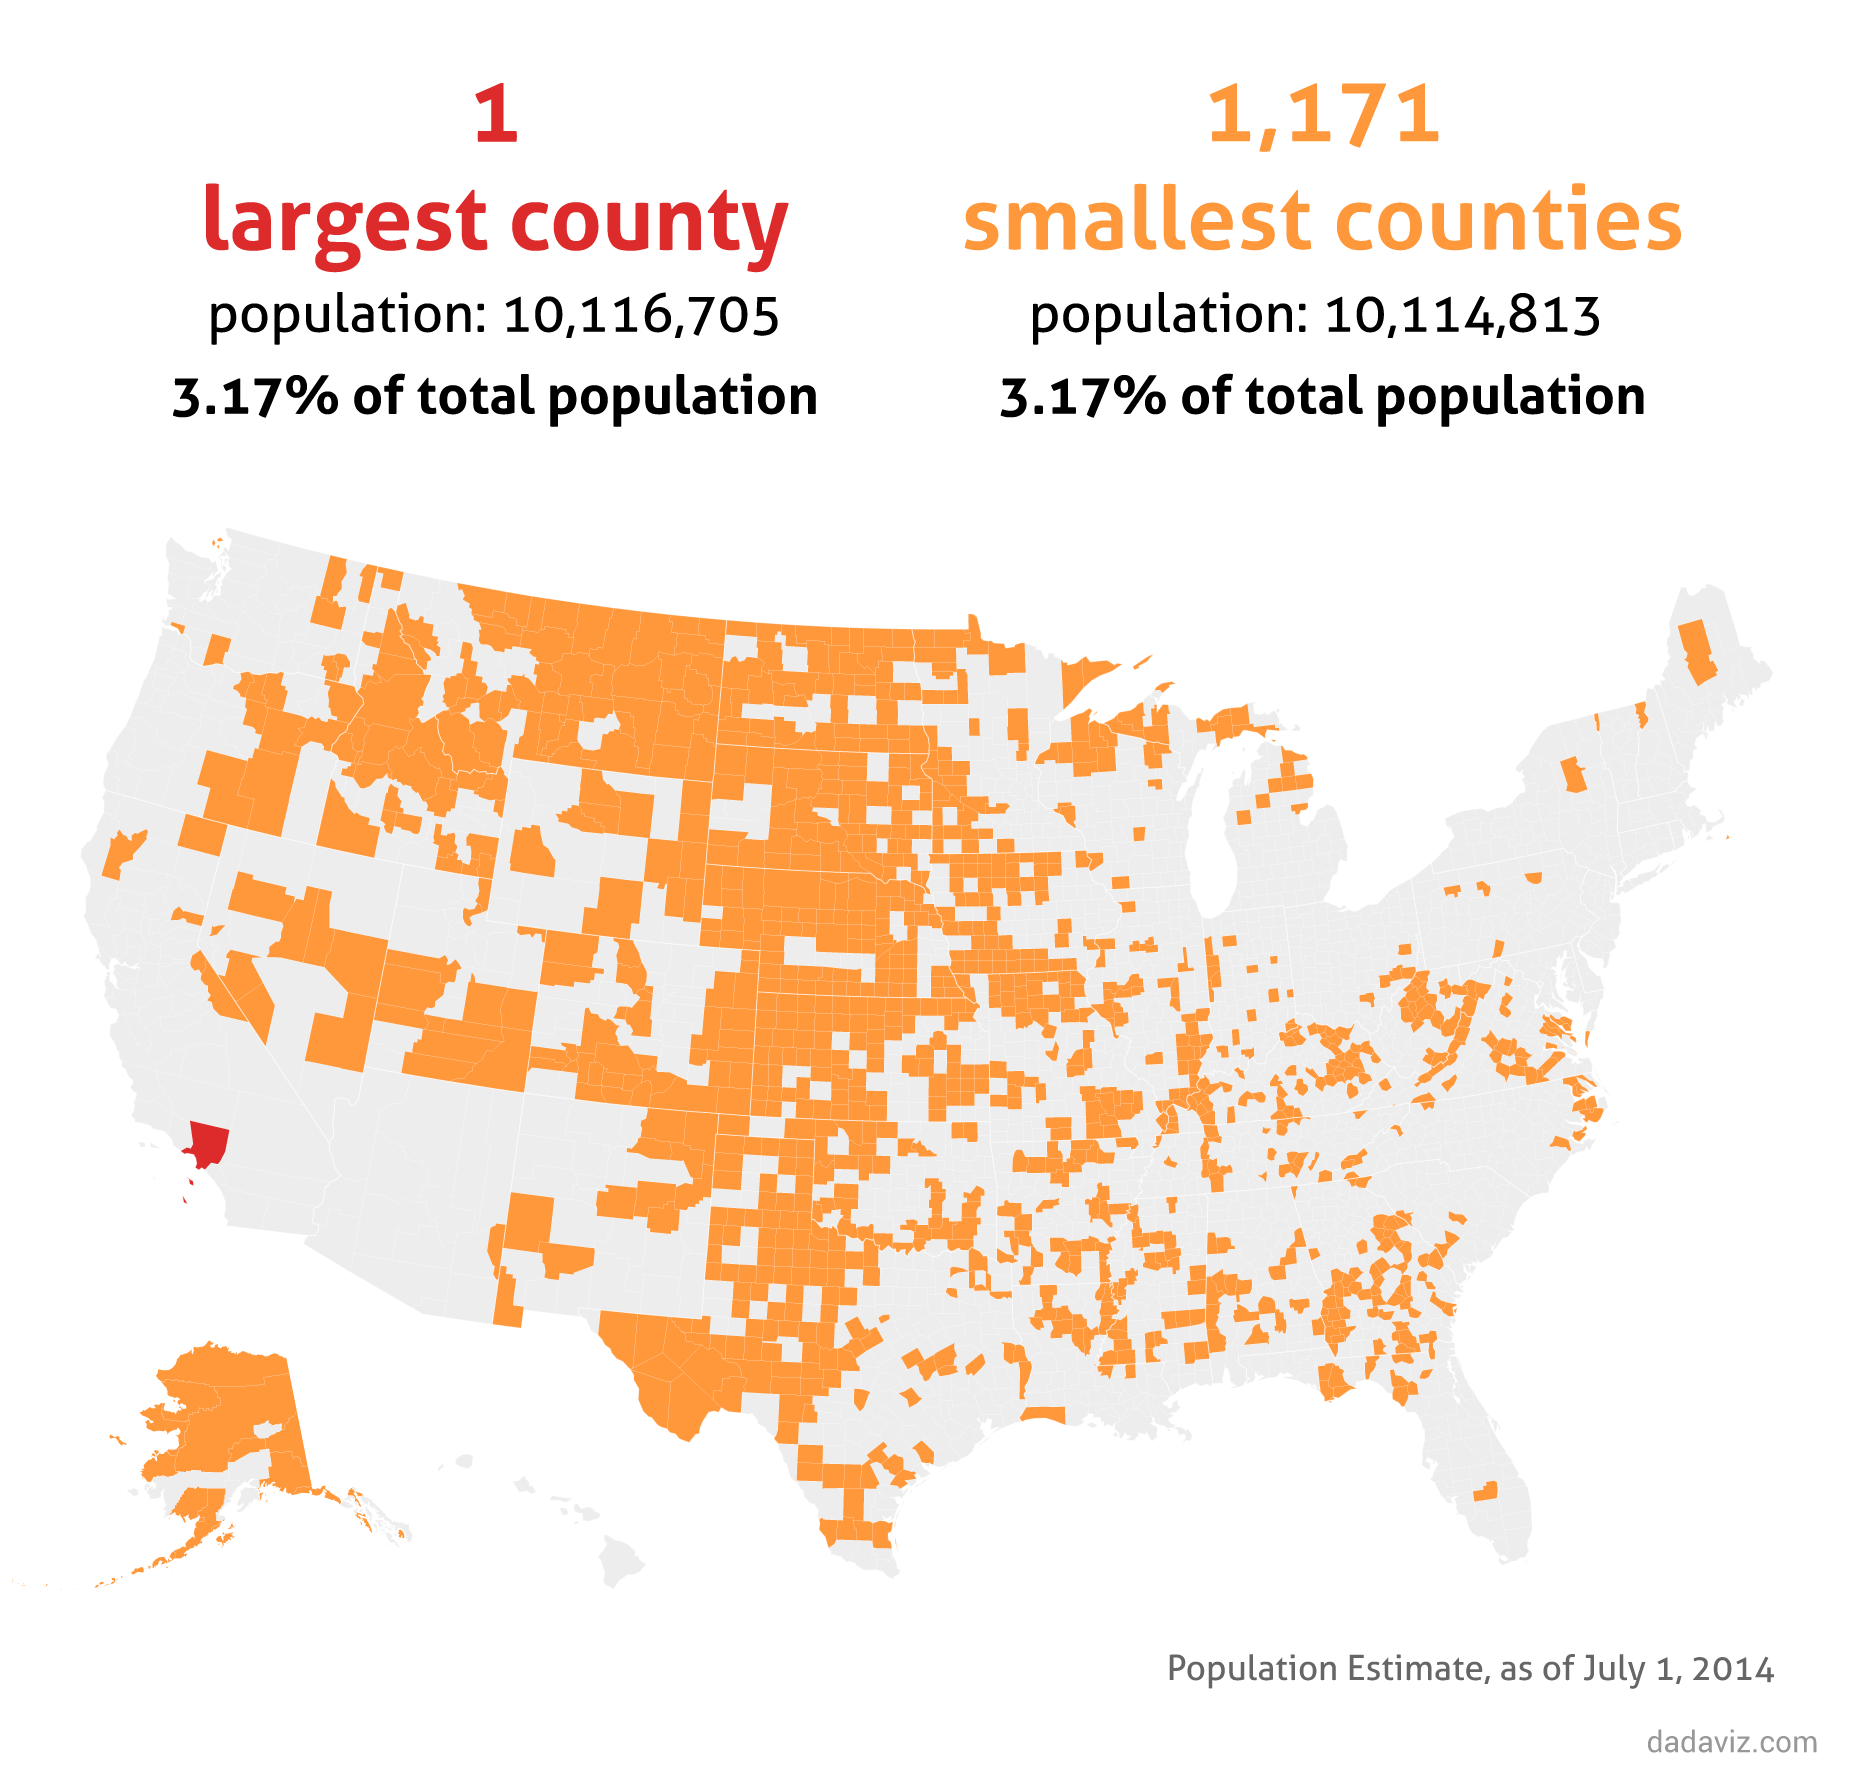 The 144 largest counties account for 50% of total population